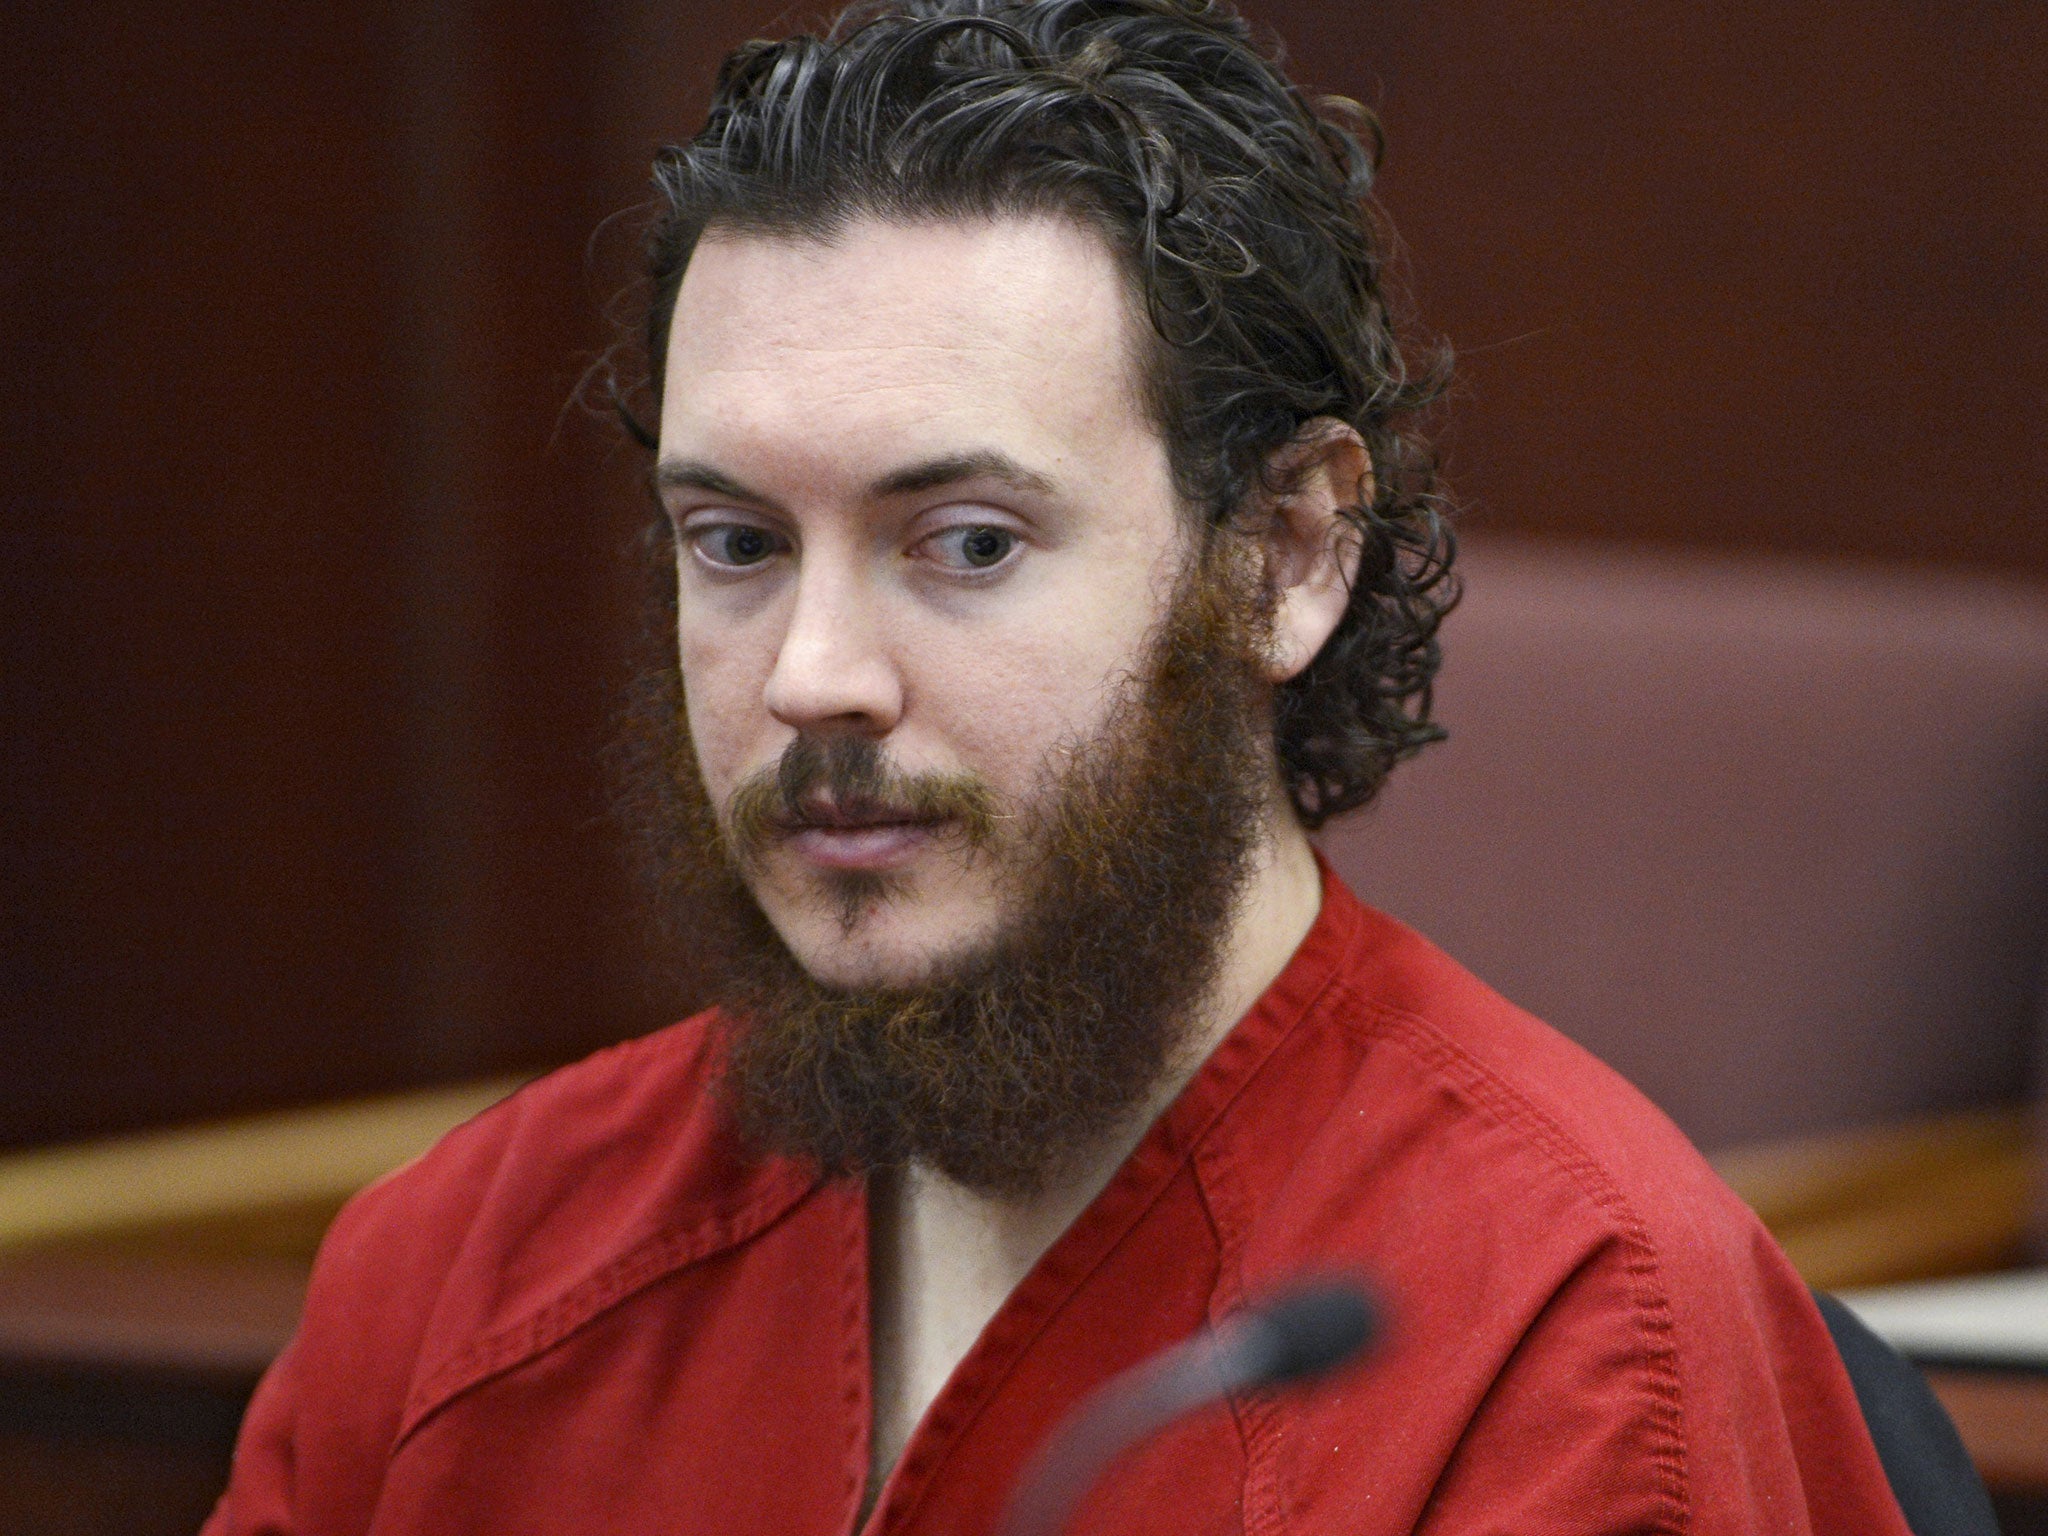 Lawyers for Colorado movie theatre shooter James Holmes have argued against the death penalty